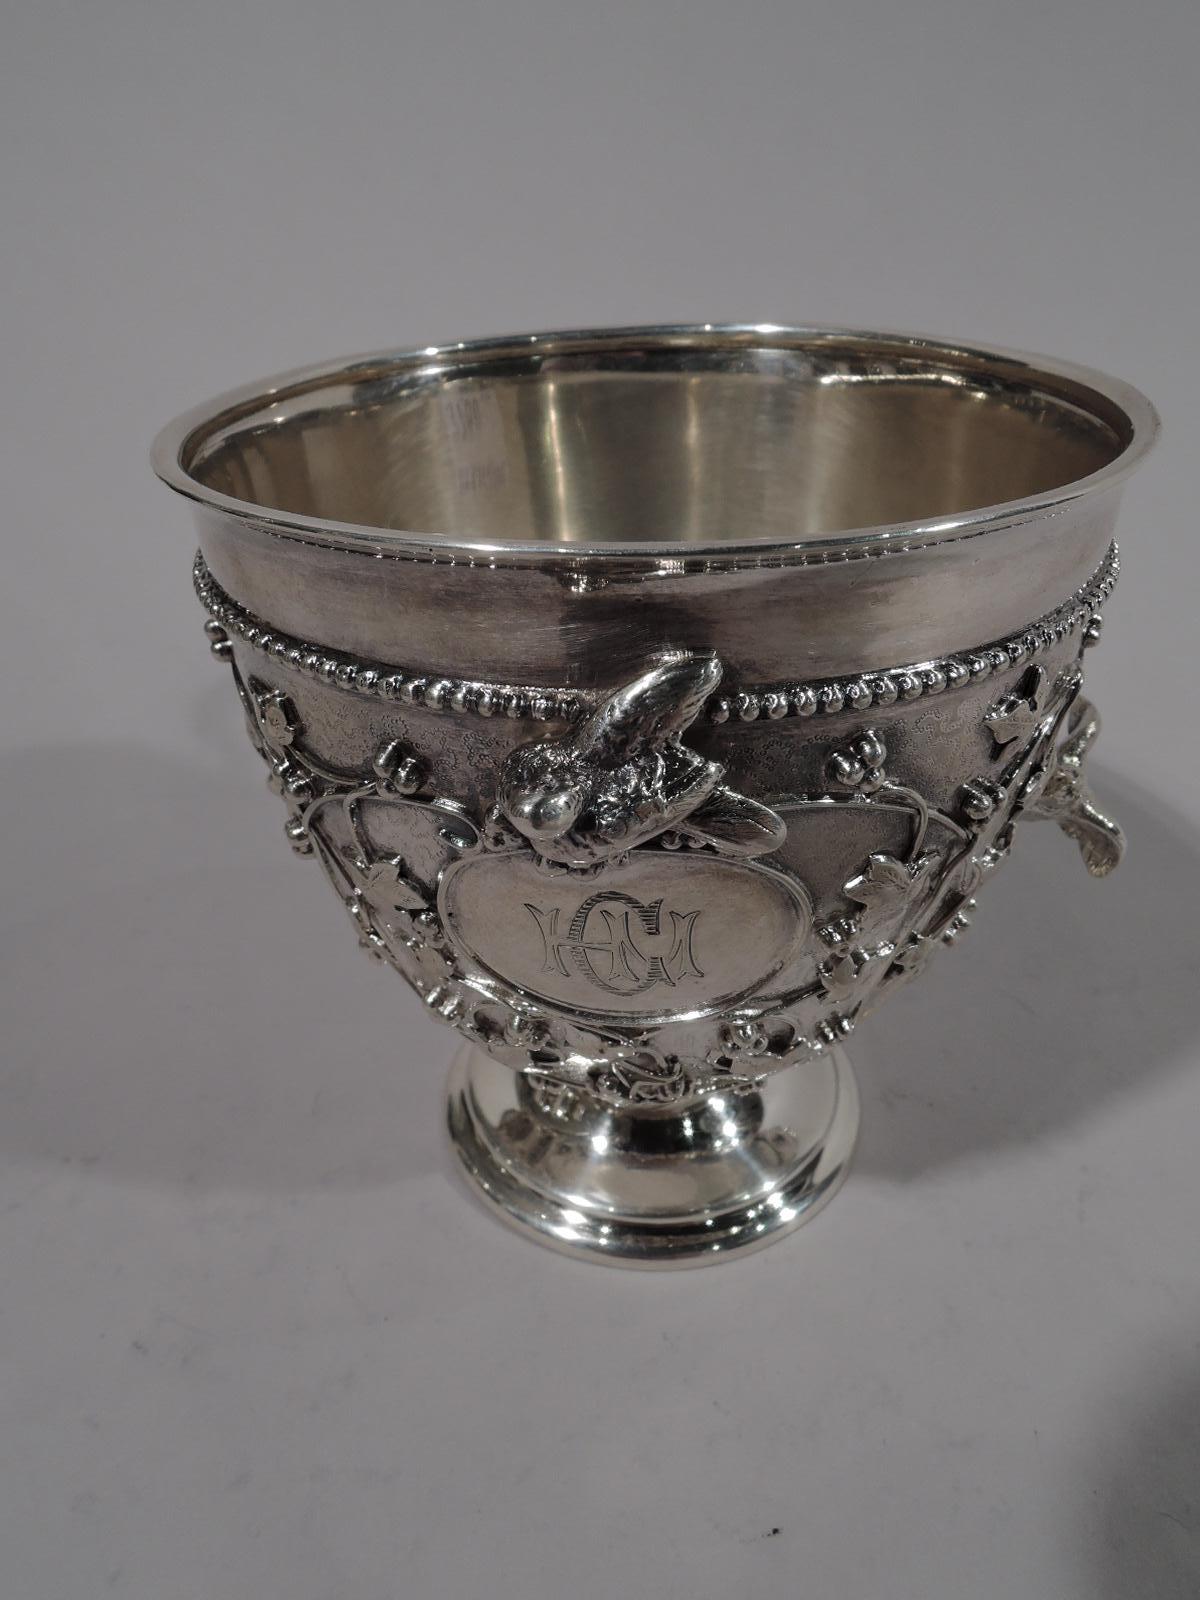 Finest quality sterling silver baby cup in rare Bird’s Nest pattern. Made by John C. Moore & Son for Tiffany & Co. in New York, circa 1865-1870. Ovoid bowl on stepped foot. Scroll handle with squiggle tail. Bowl has shaped pointille ornament and